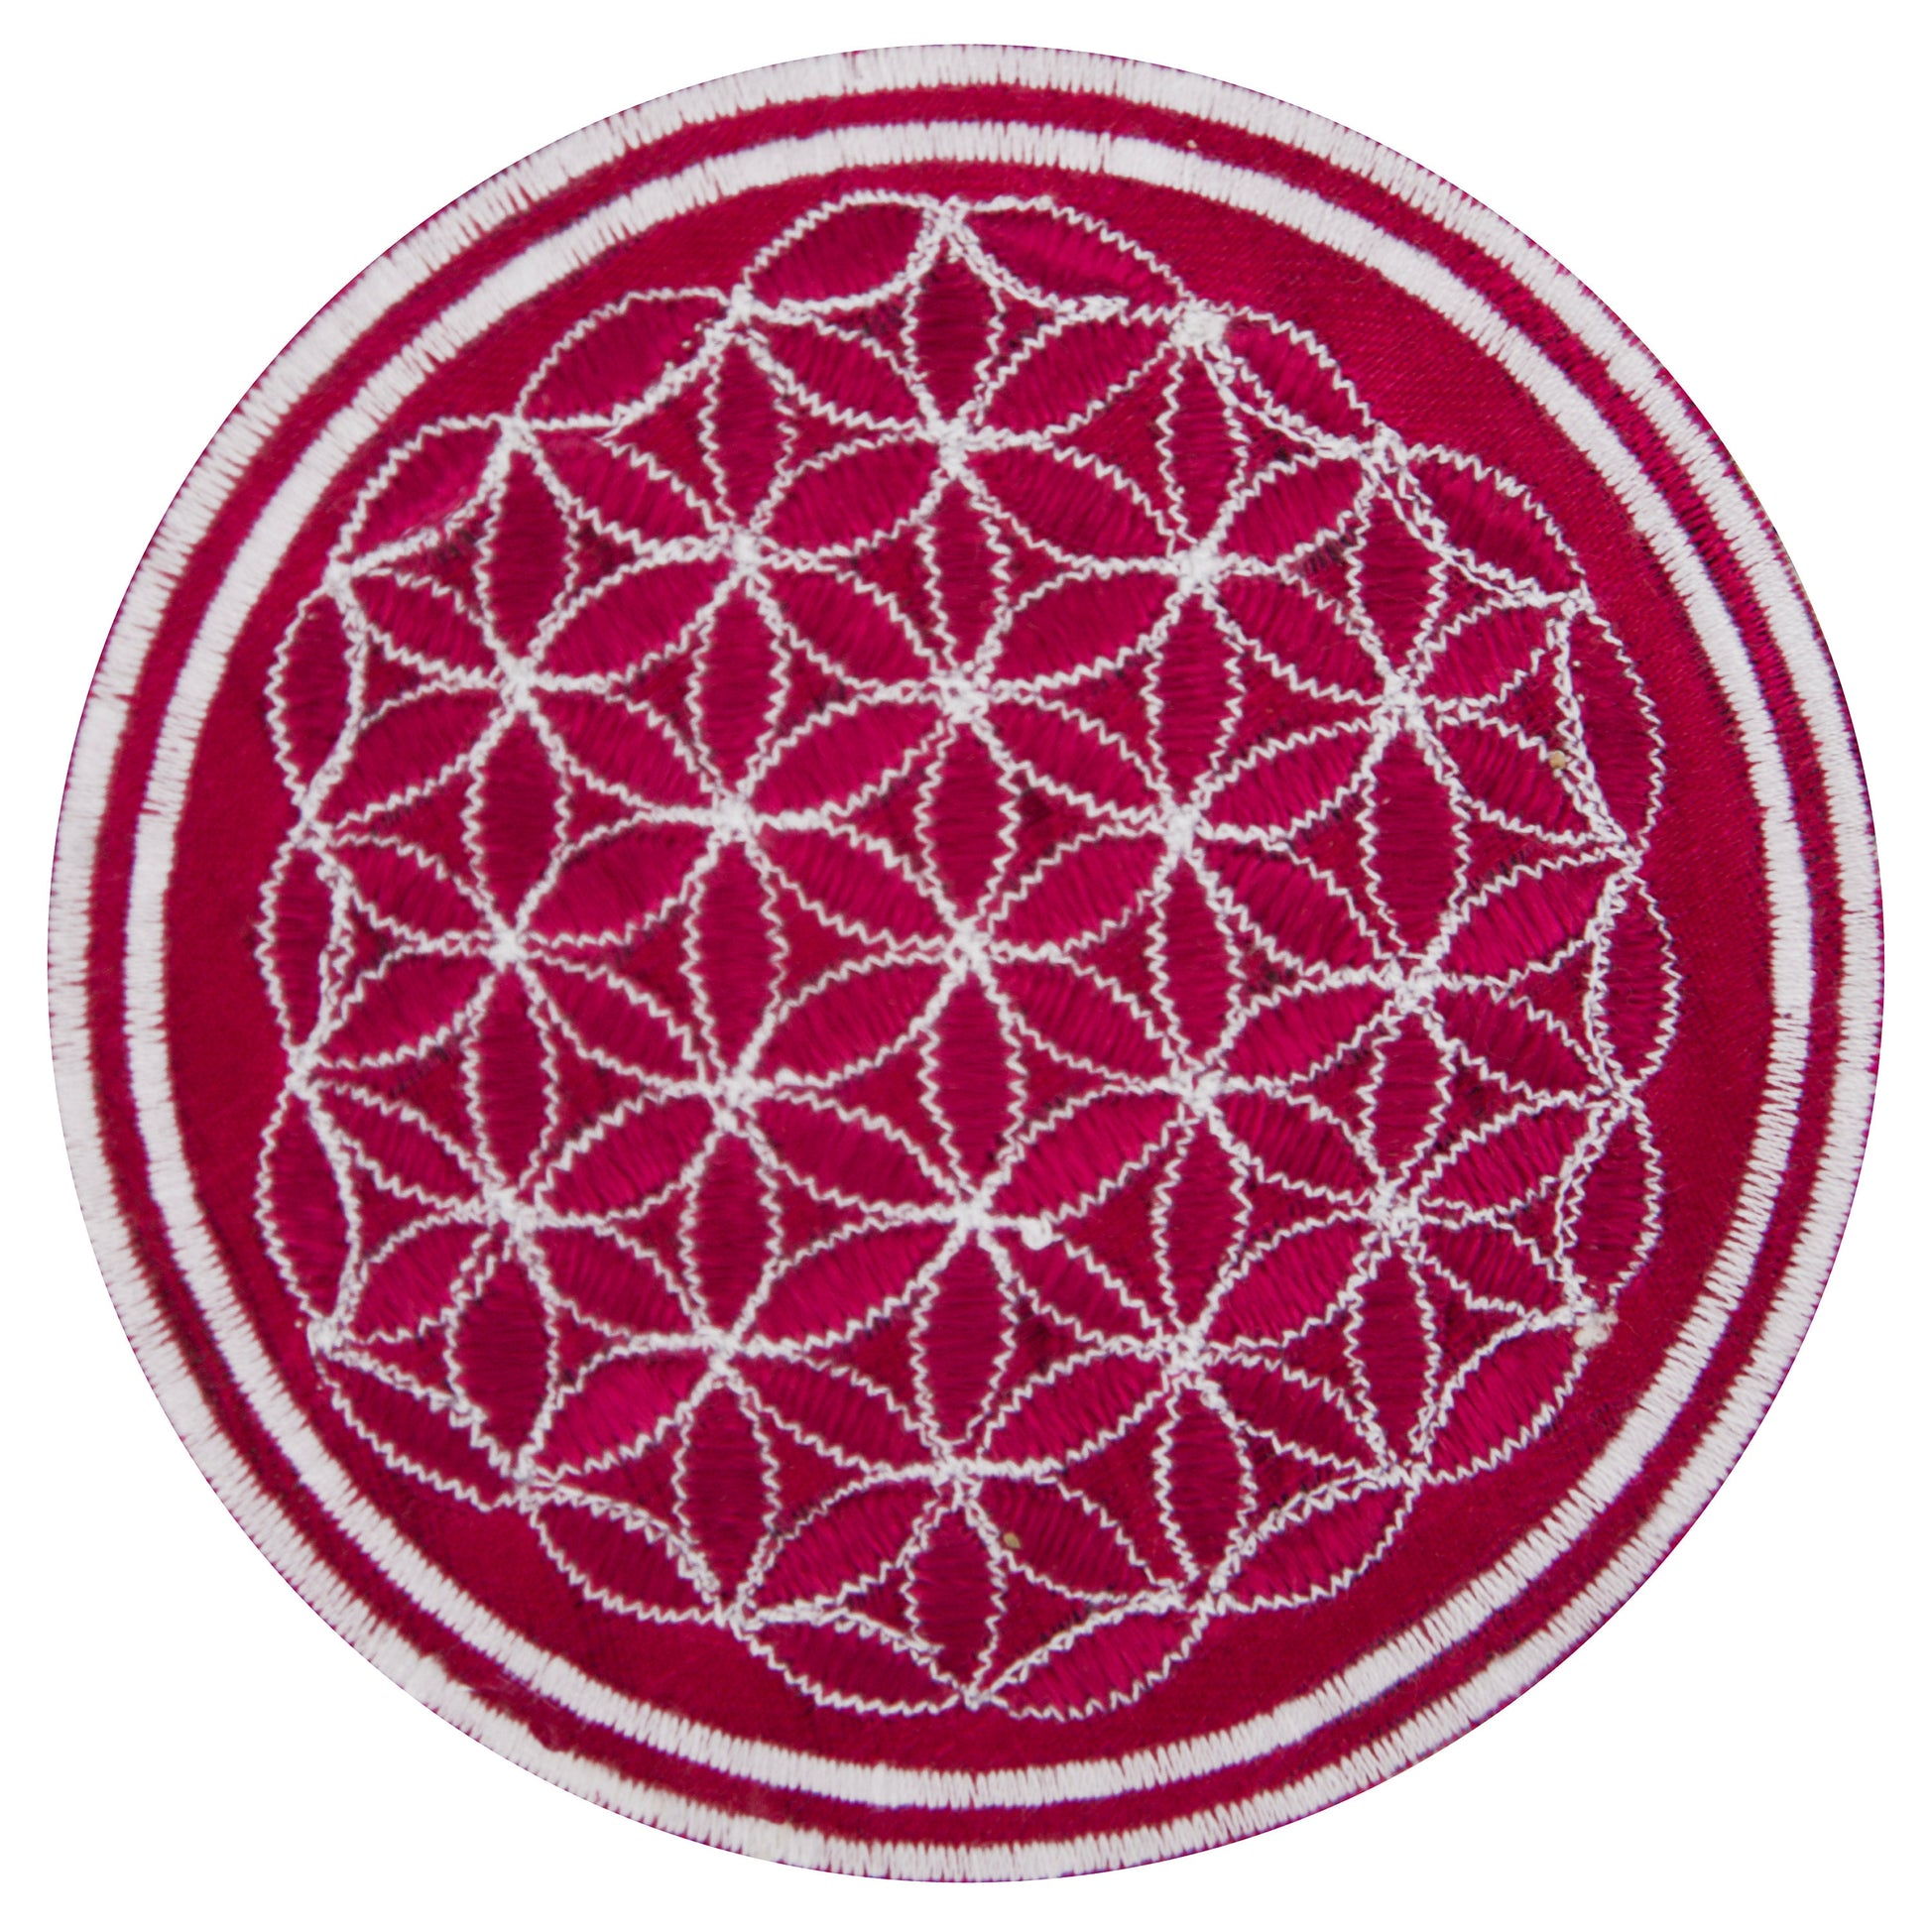 black blue flower of life patch sacred geometry embroidery for sew on